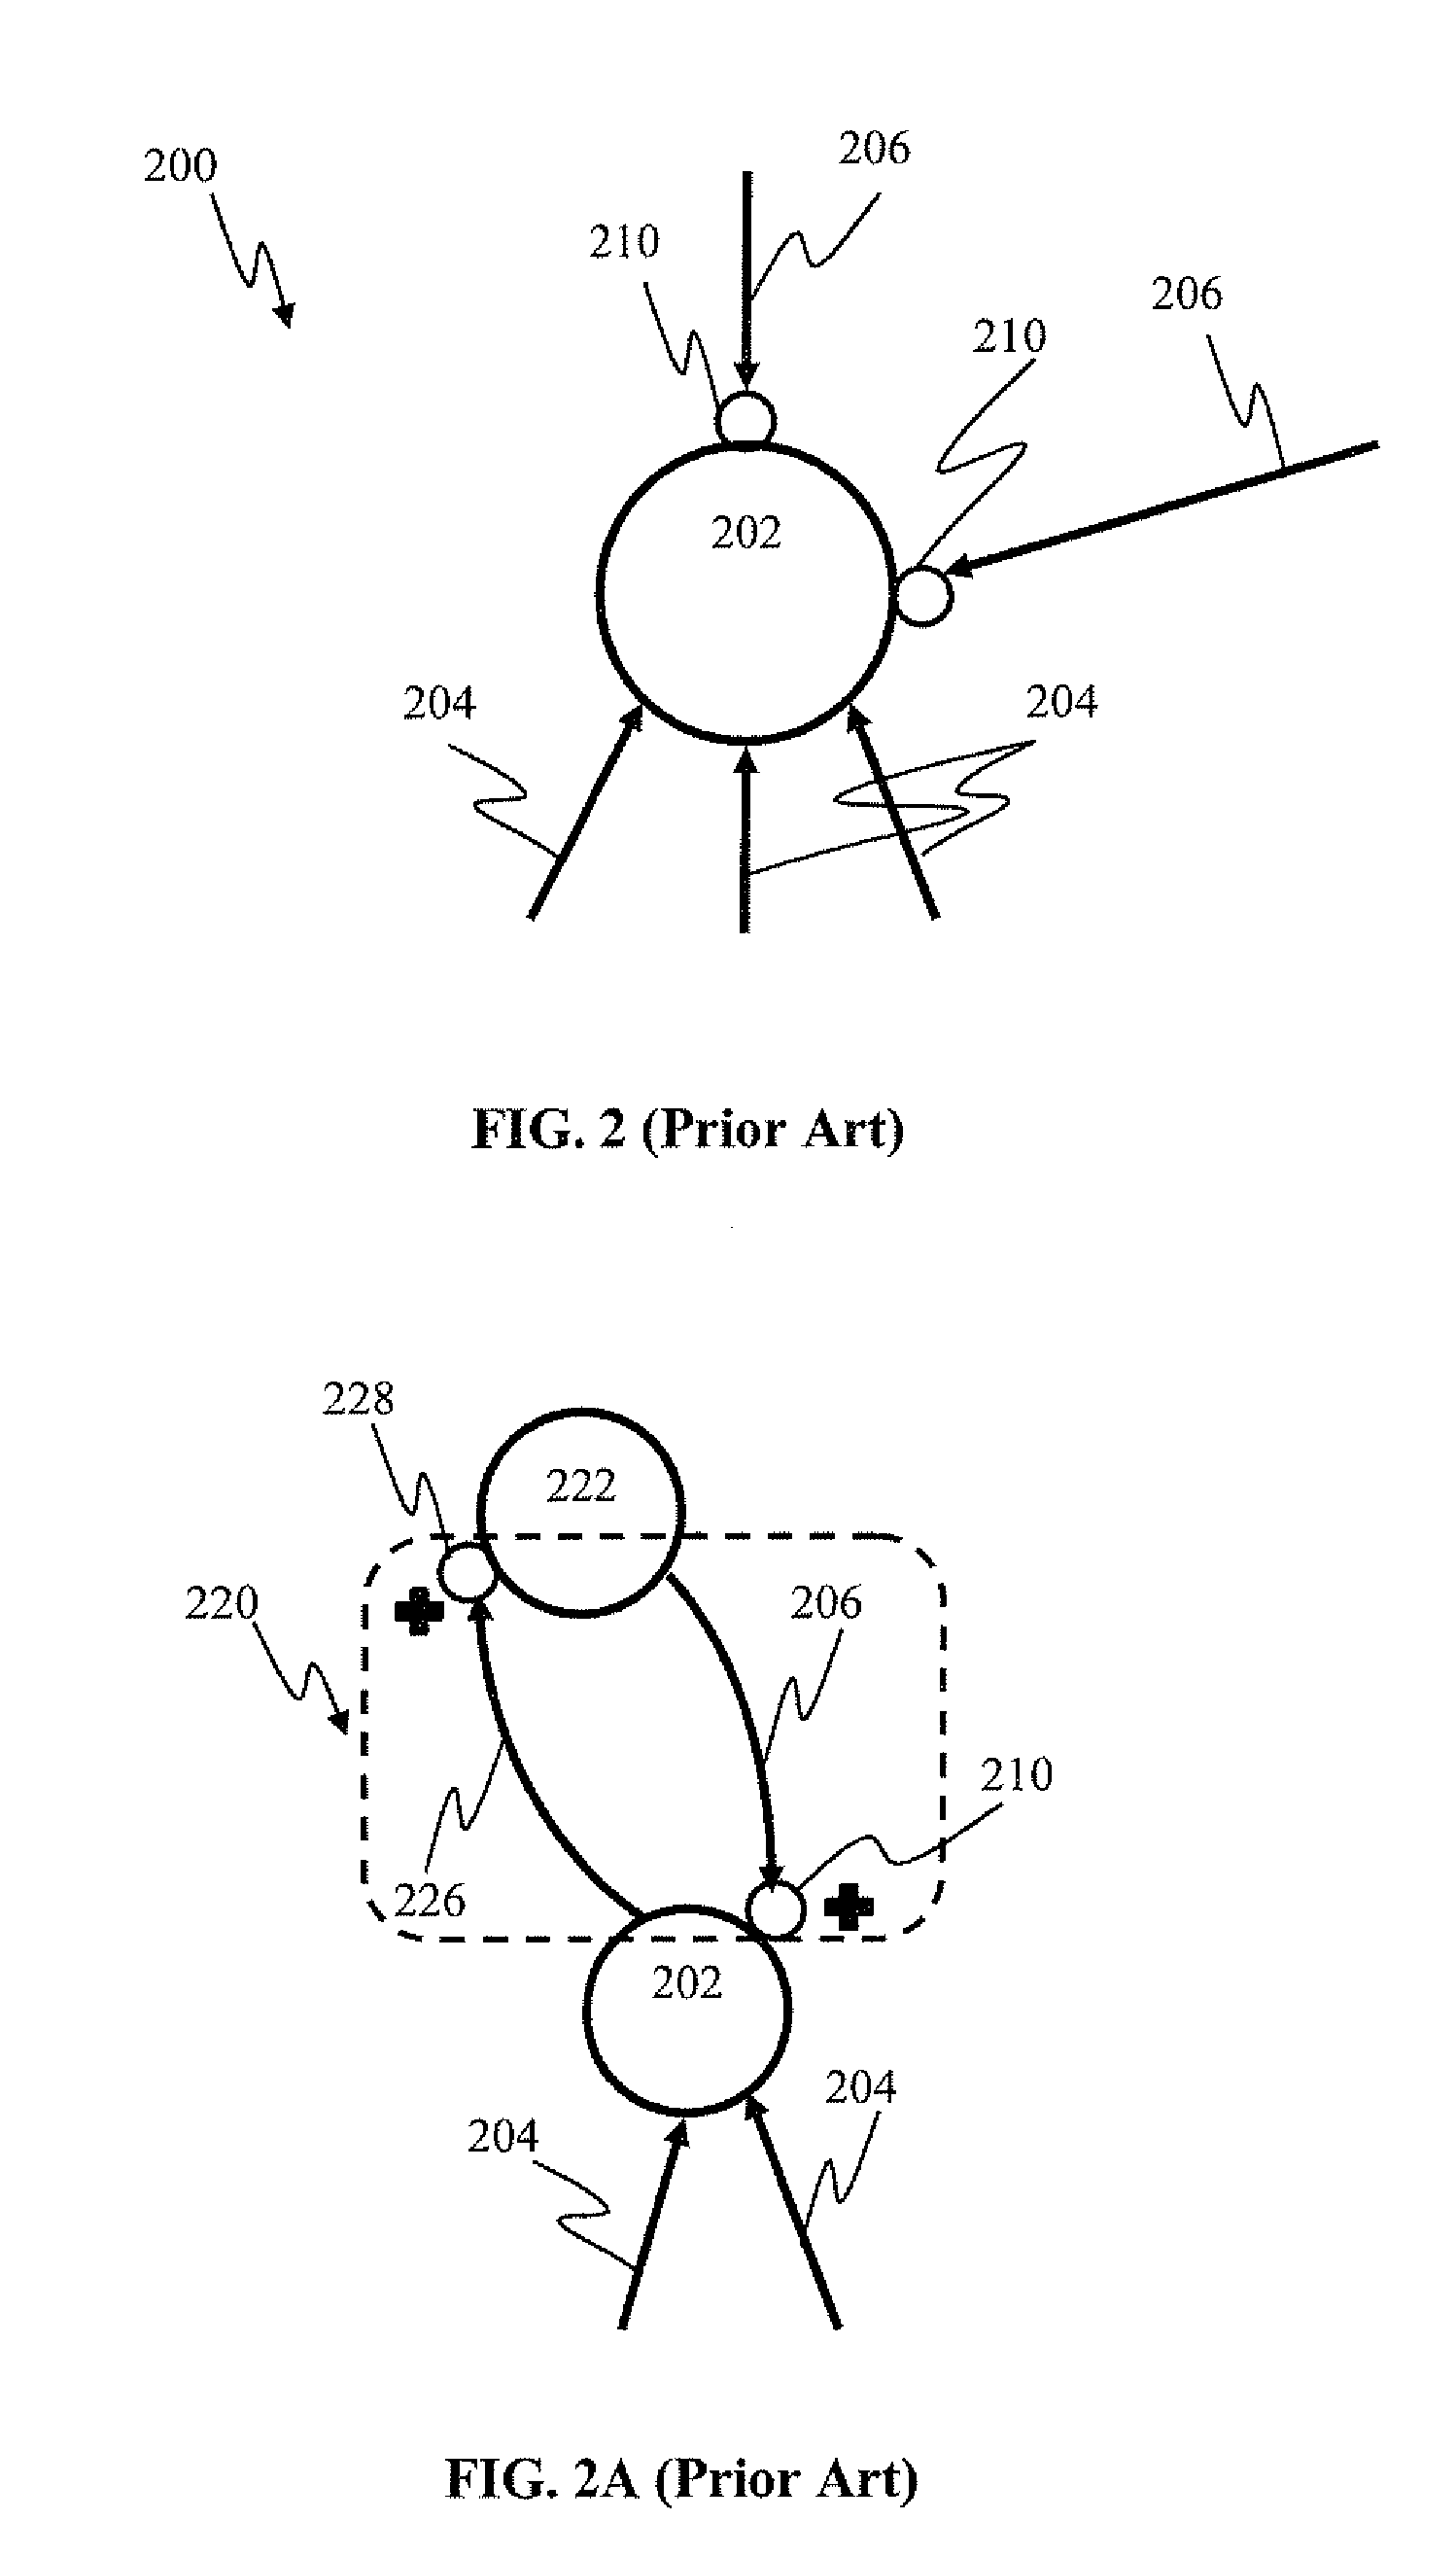 Spiking neural network object recognition apparatus and methods